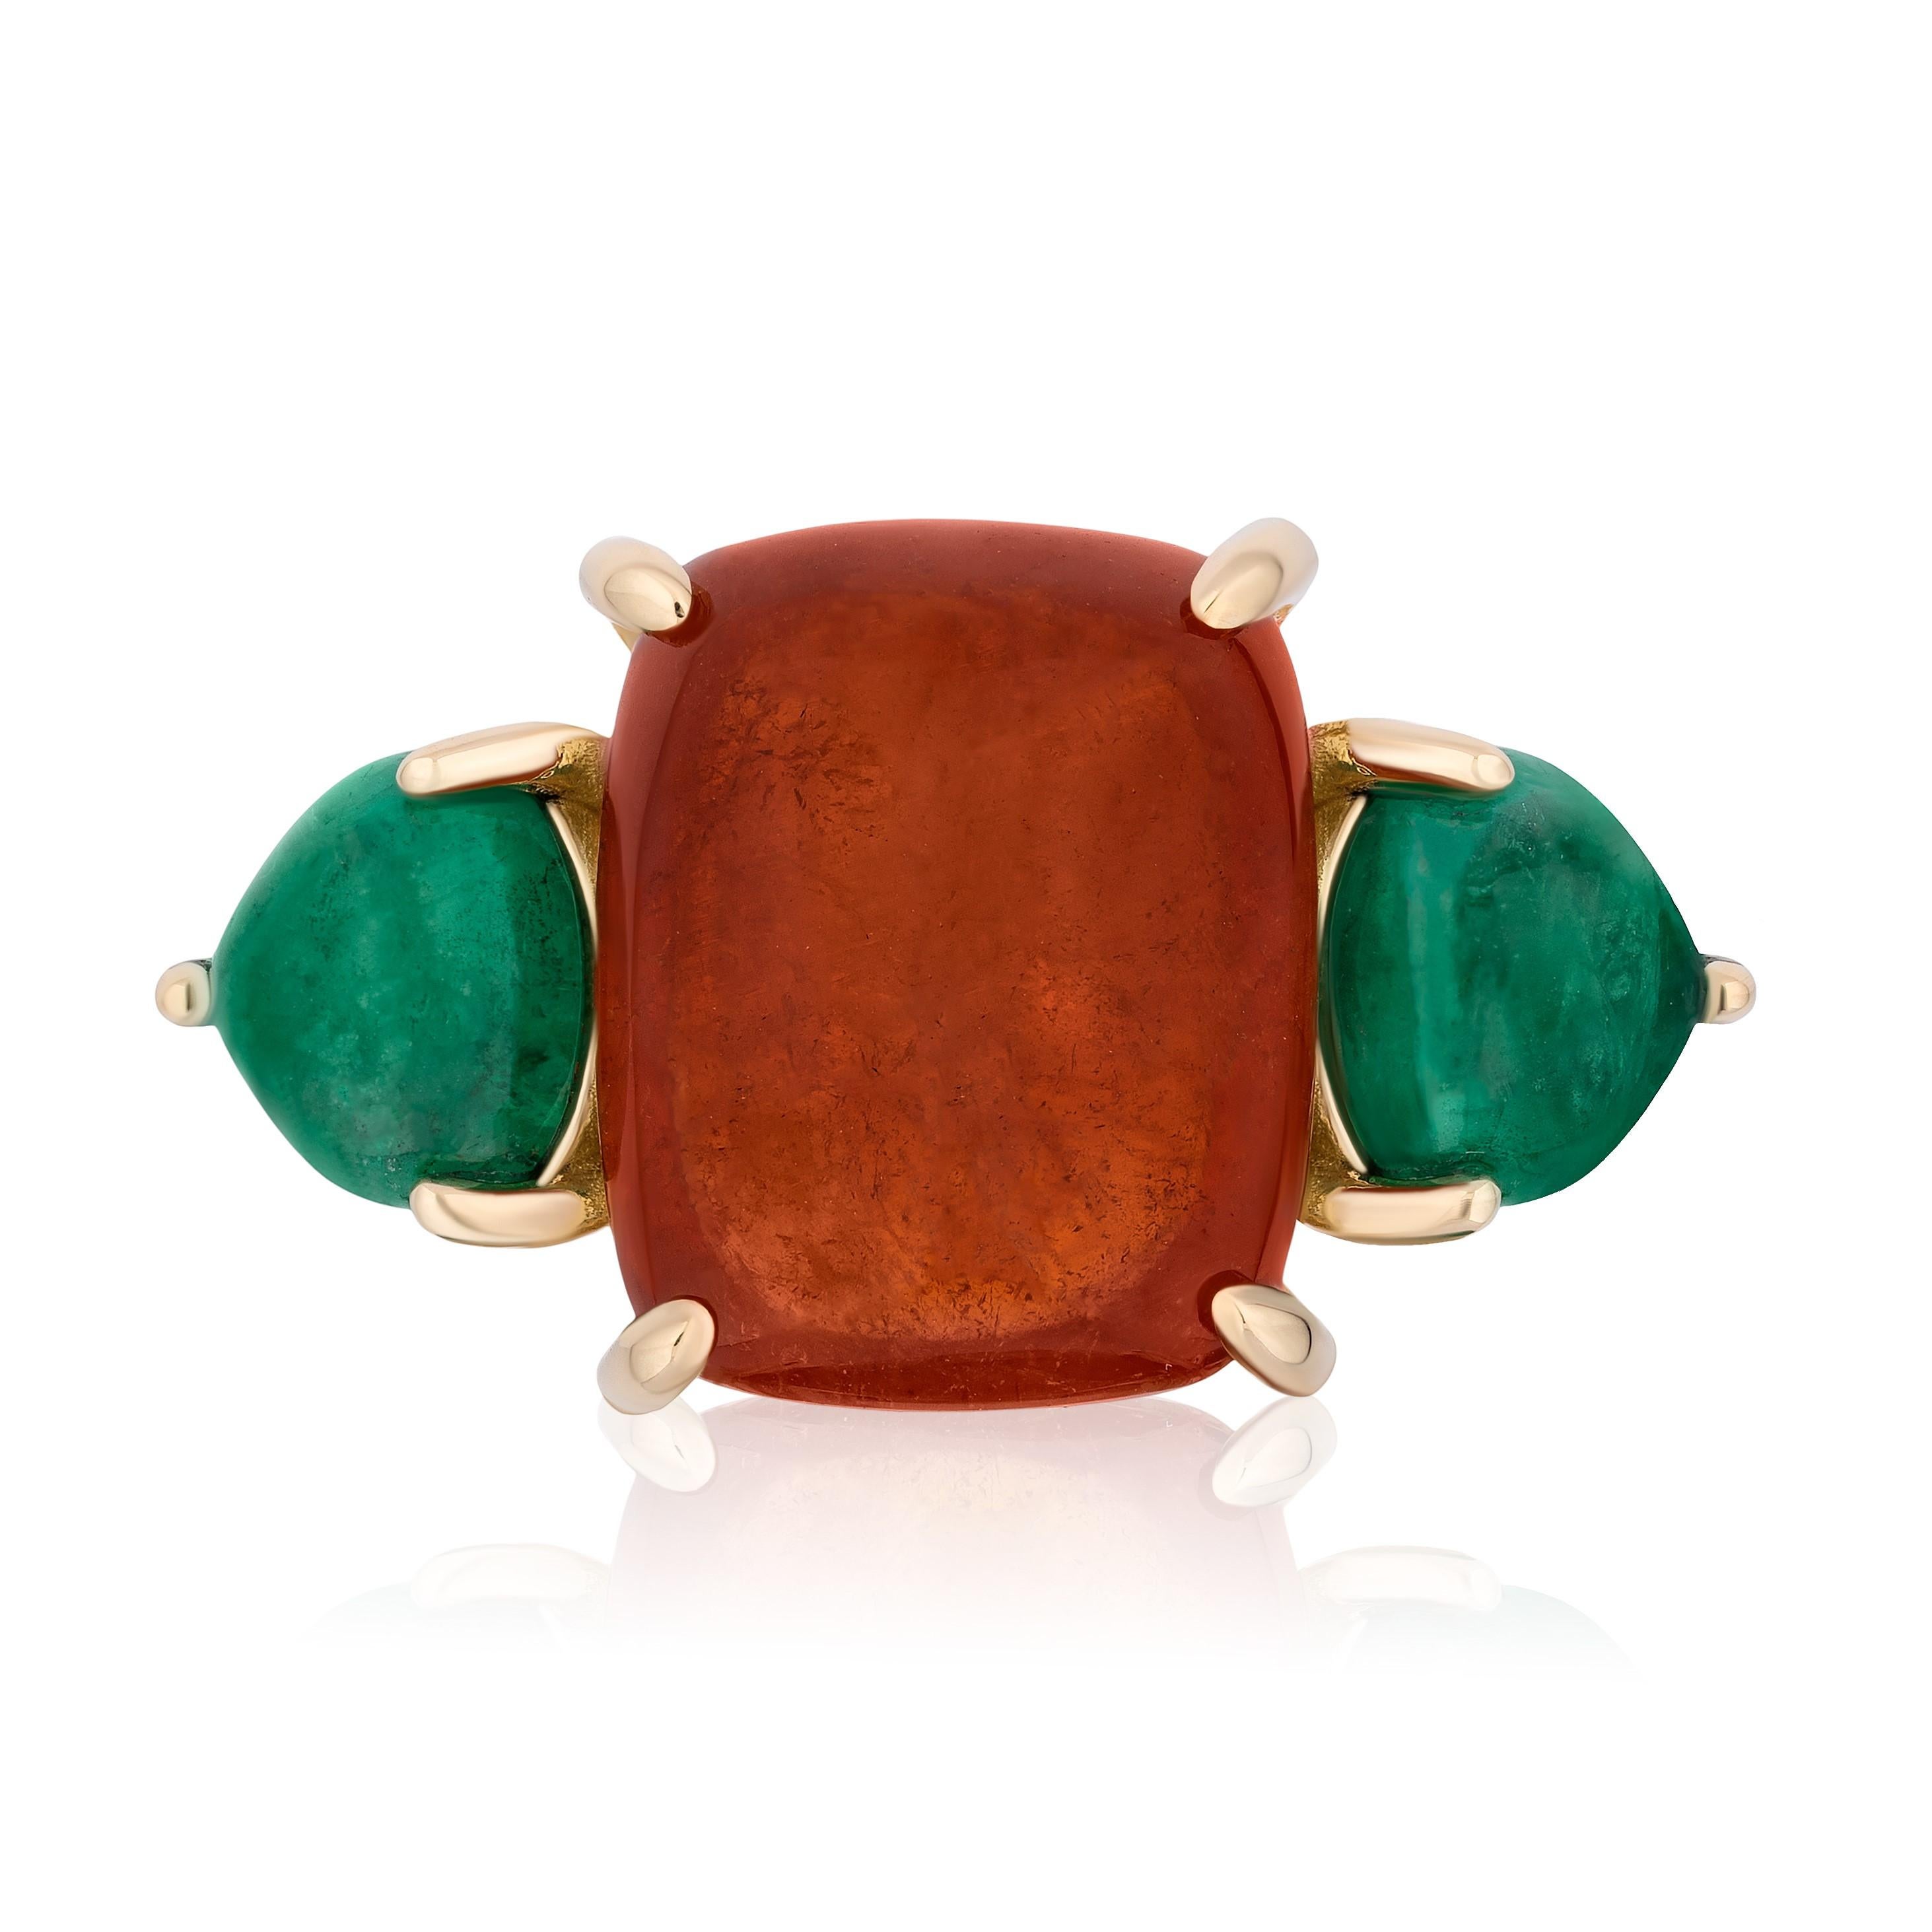 Andreoli Spessartite Emerald 18 Karat Yellow Gold Ring

This ring features:
- 17.22 Carat Spessartite
- 3.30 Carat Emerald Cabochon
- 9.28 Gram 18K Yellow Gold
- Made In Italy